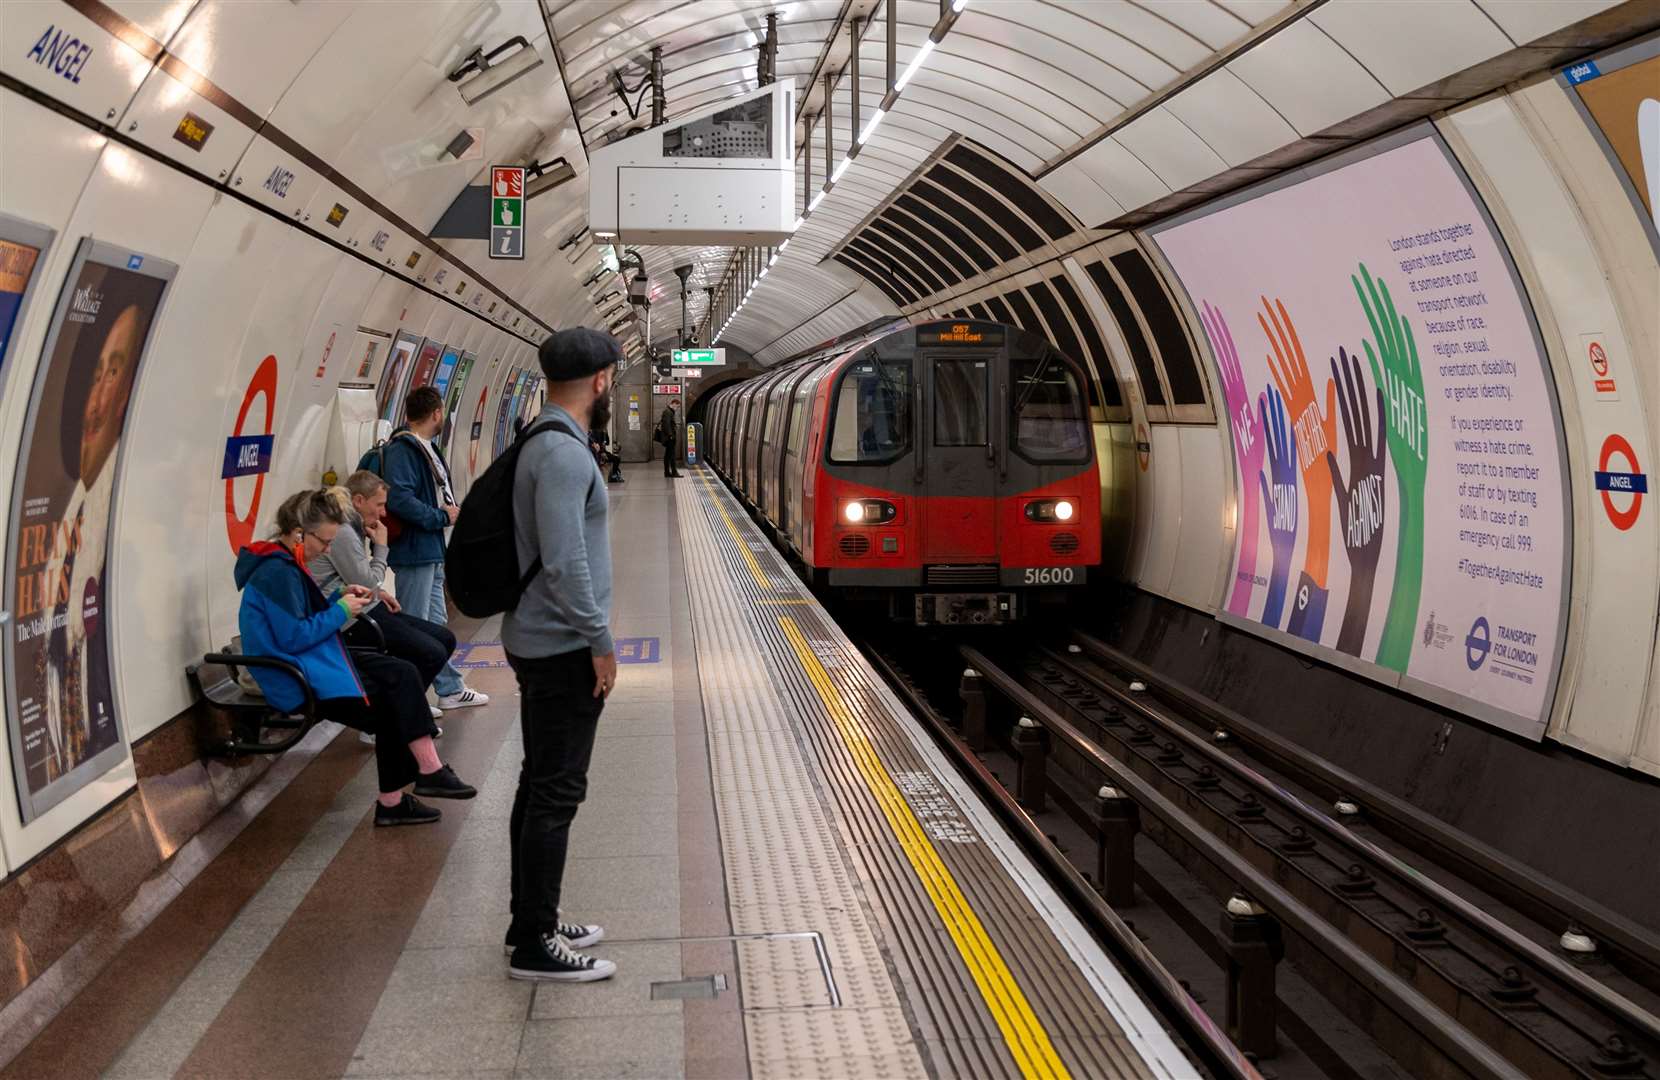 Drivers on the London Underground are also staging two walkouts. Image: iStock.